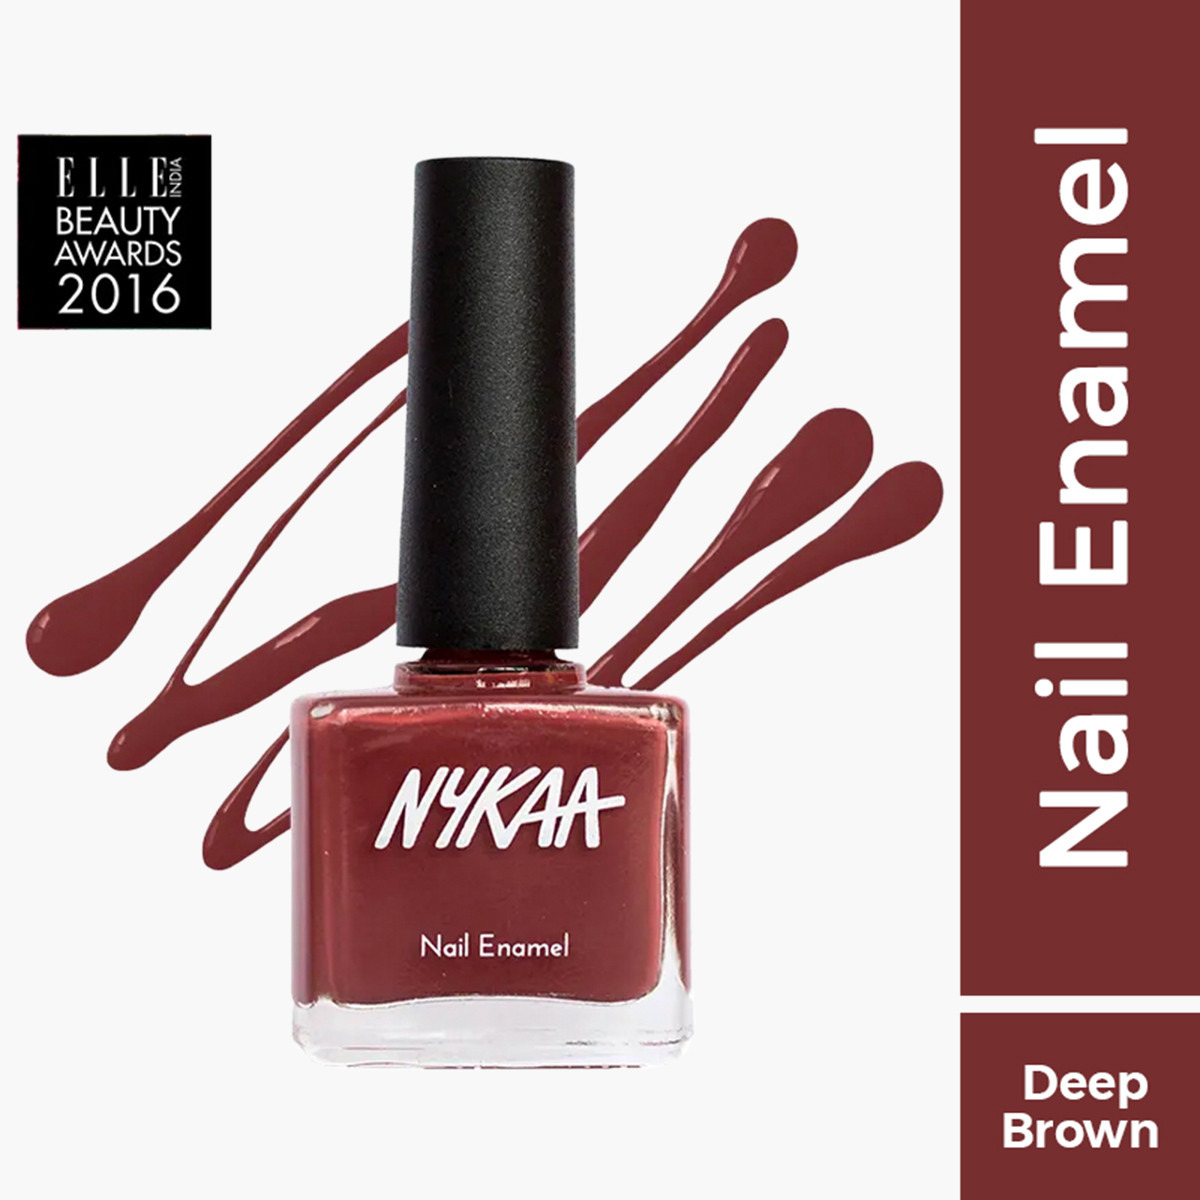 NYKAA Nail Enamel - squid ink mousse-14 squid ink mousse-14 - Price in  India, Buy NYKAA Nail Enamel - squid ink mousse-14 squid ink mousse-14  Online In India, Reviews, Ratings & Features | Flipkart.com